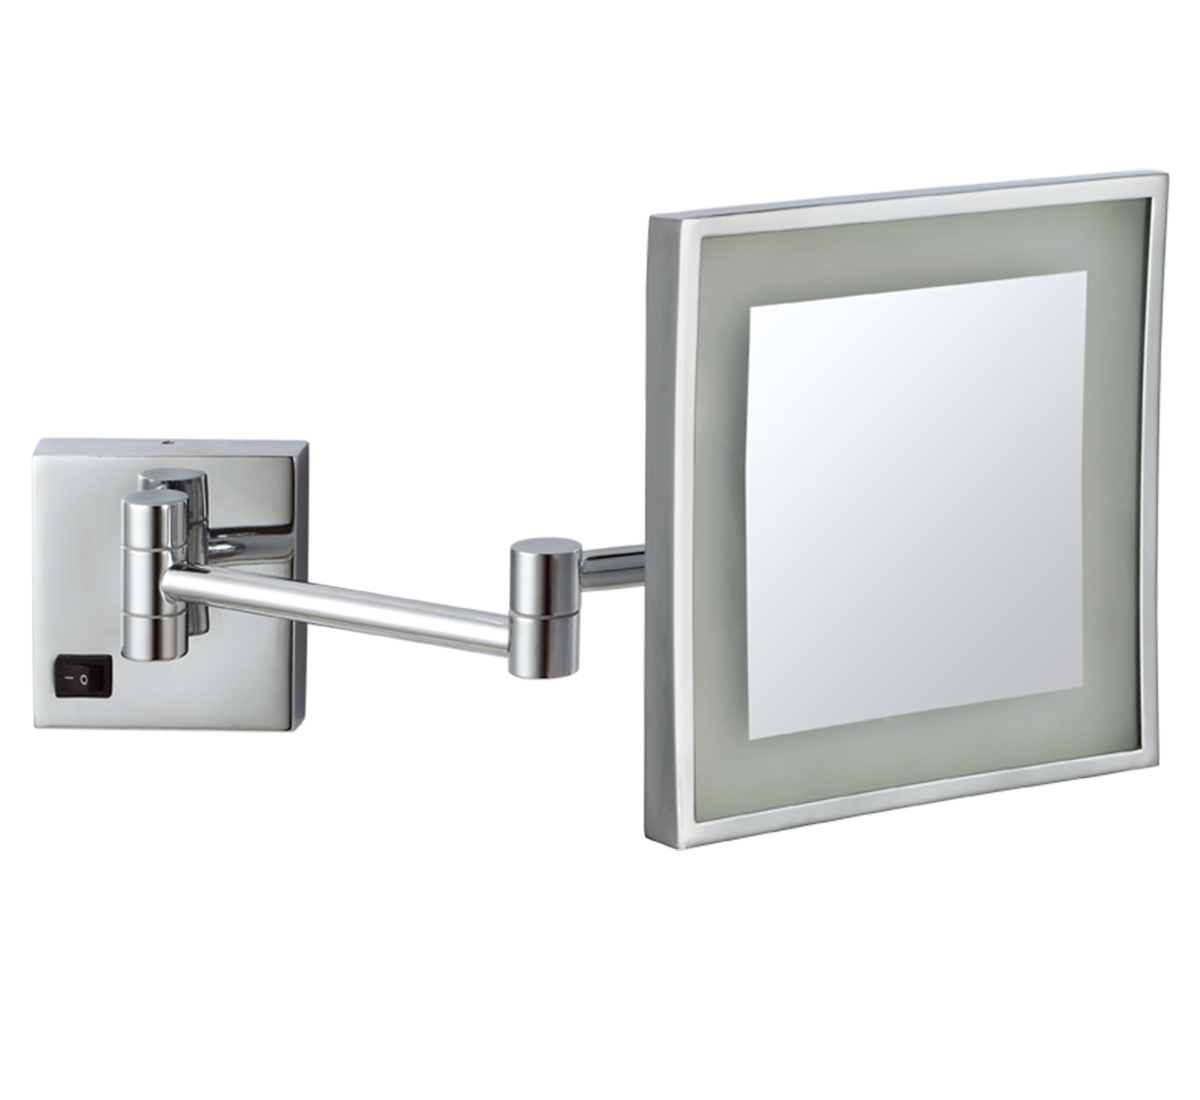 Silver Square Wall Mounted Mirror
